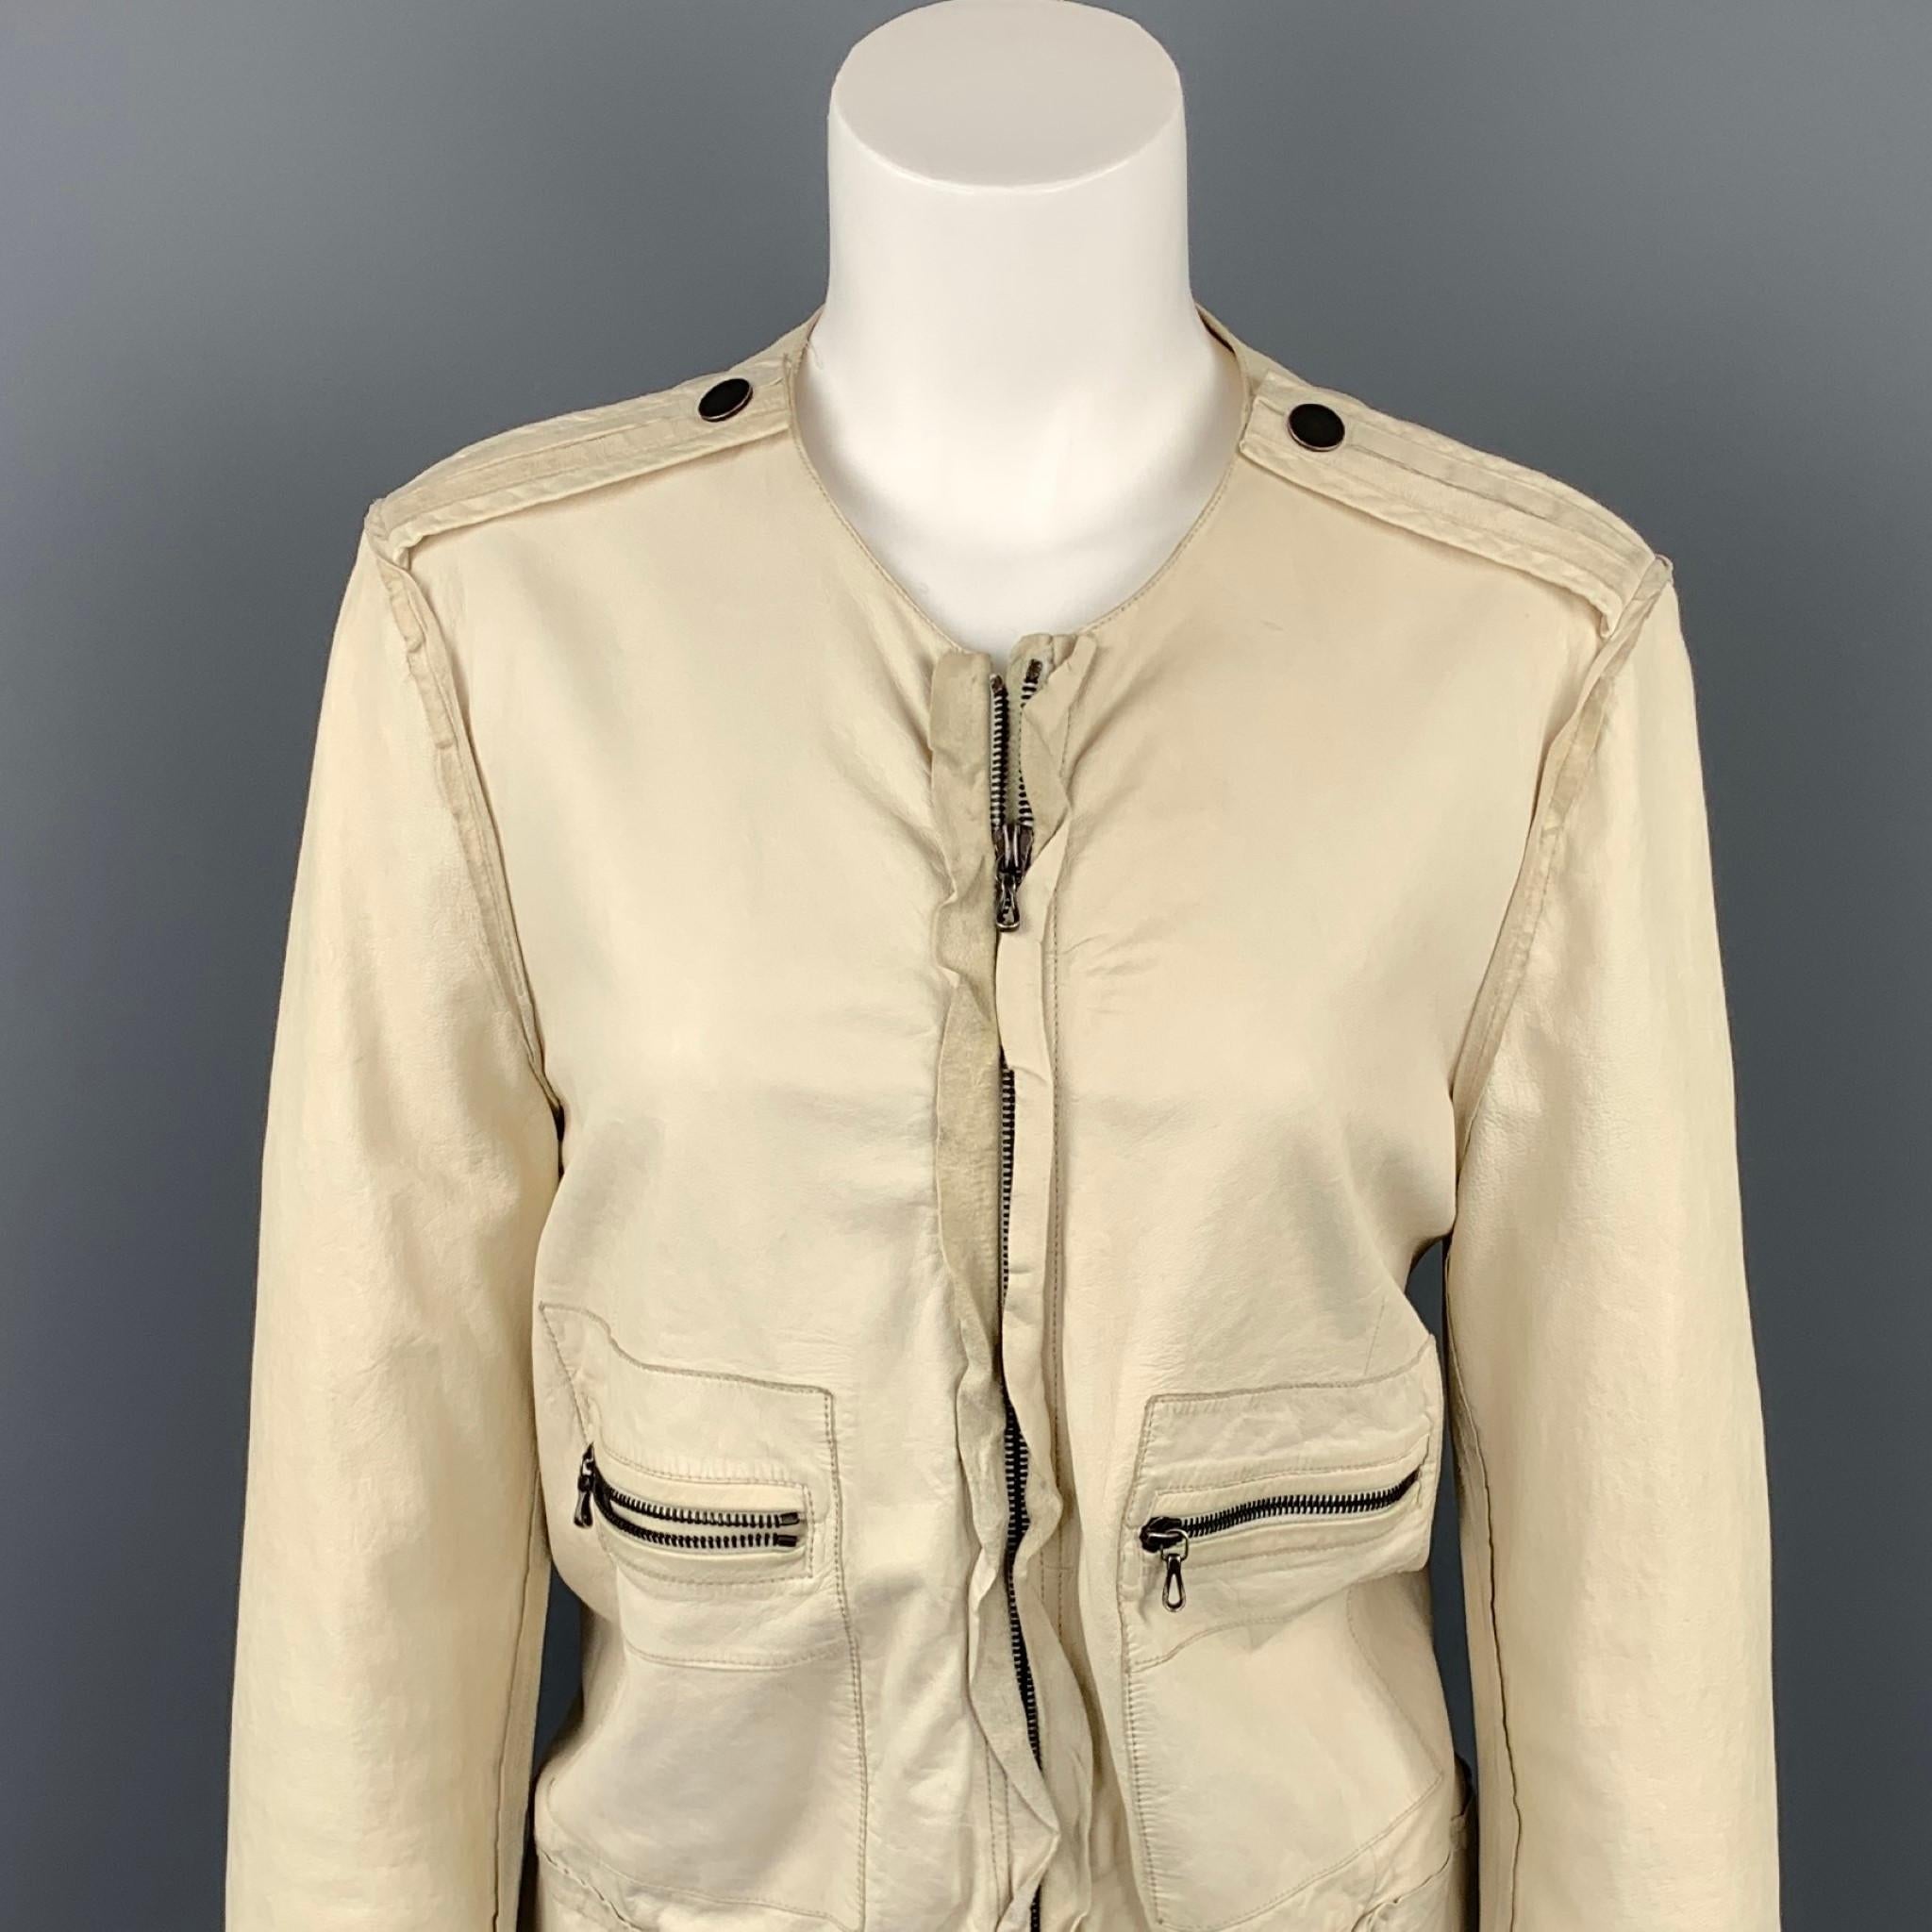 LANVIN Spring 2010 jacket comes in a off white leather and featuring a collarless neckline, epaulettes, zipper patch pockets, ruffled trim, and a zip up closure. Minor wear throughout leather. Made in Italy.

Good Pre-Owned Condition.
Marked: IT